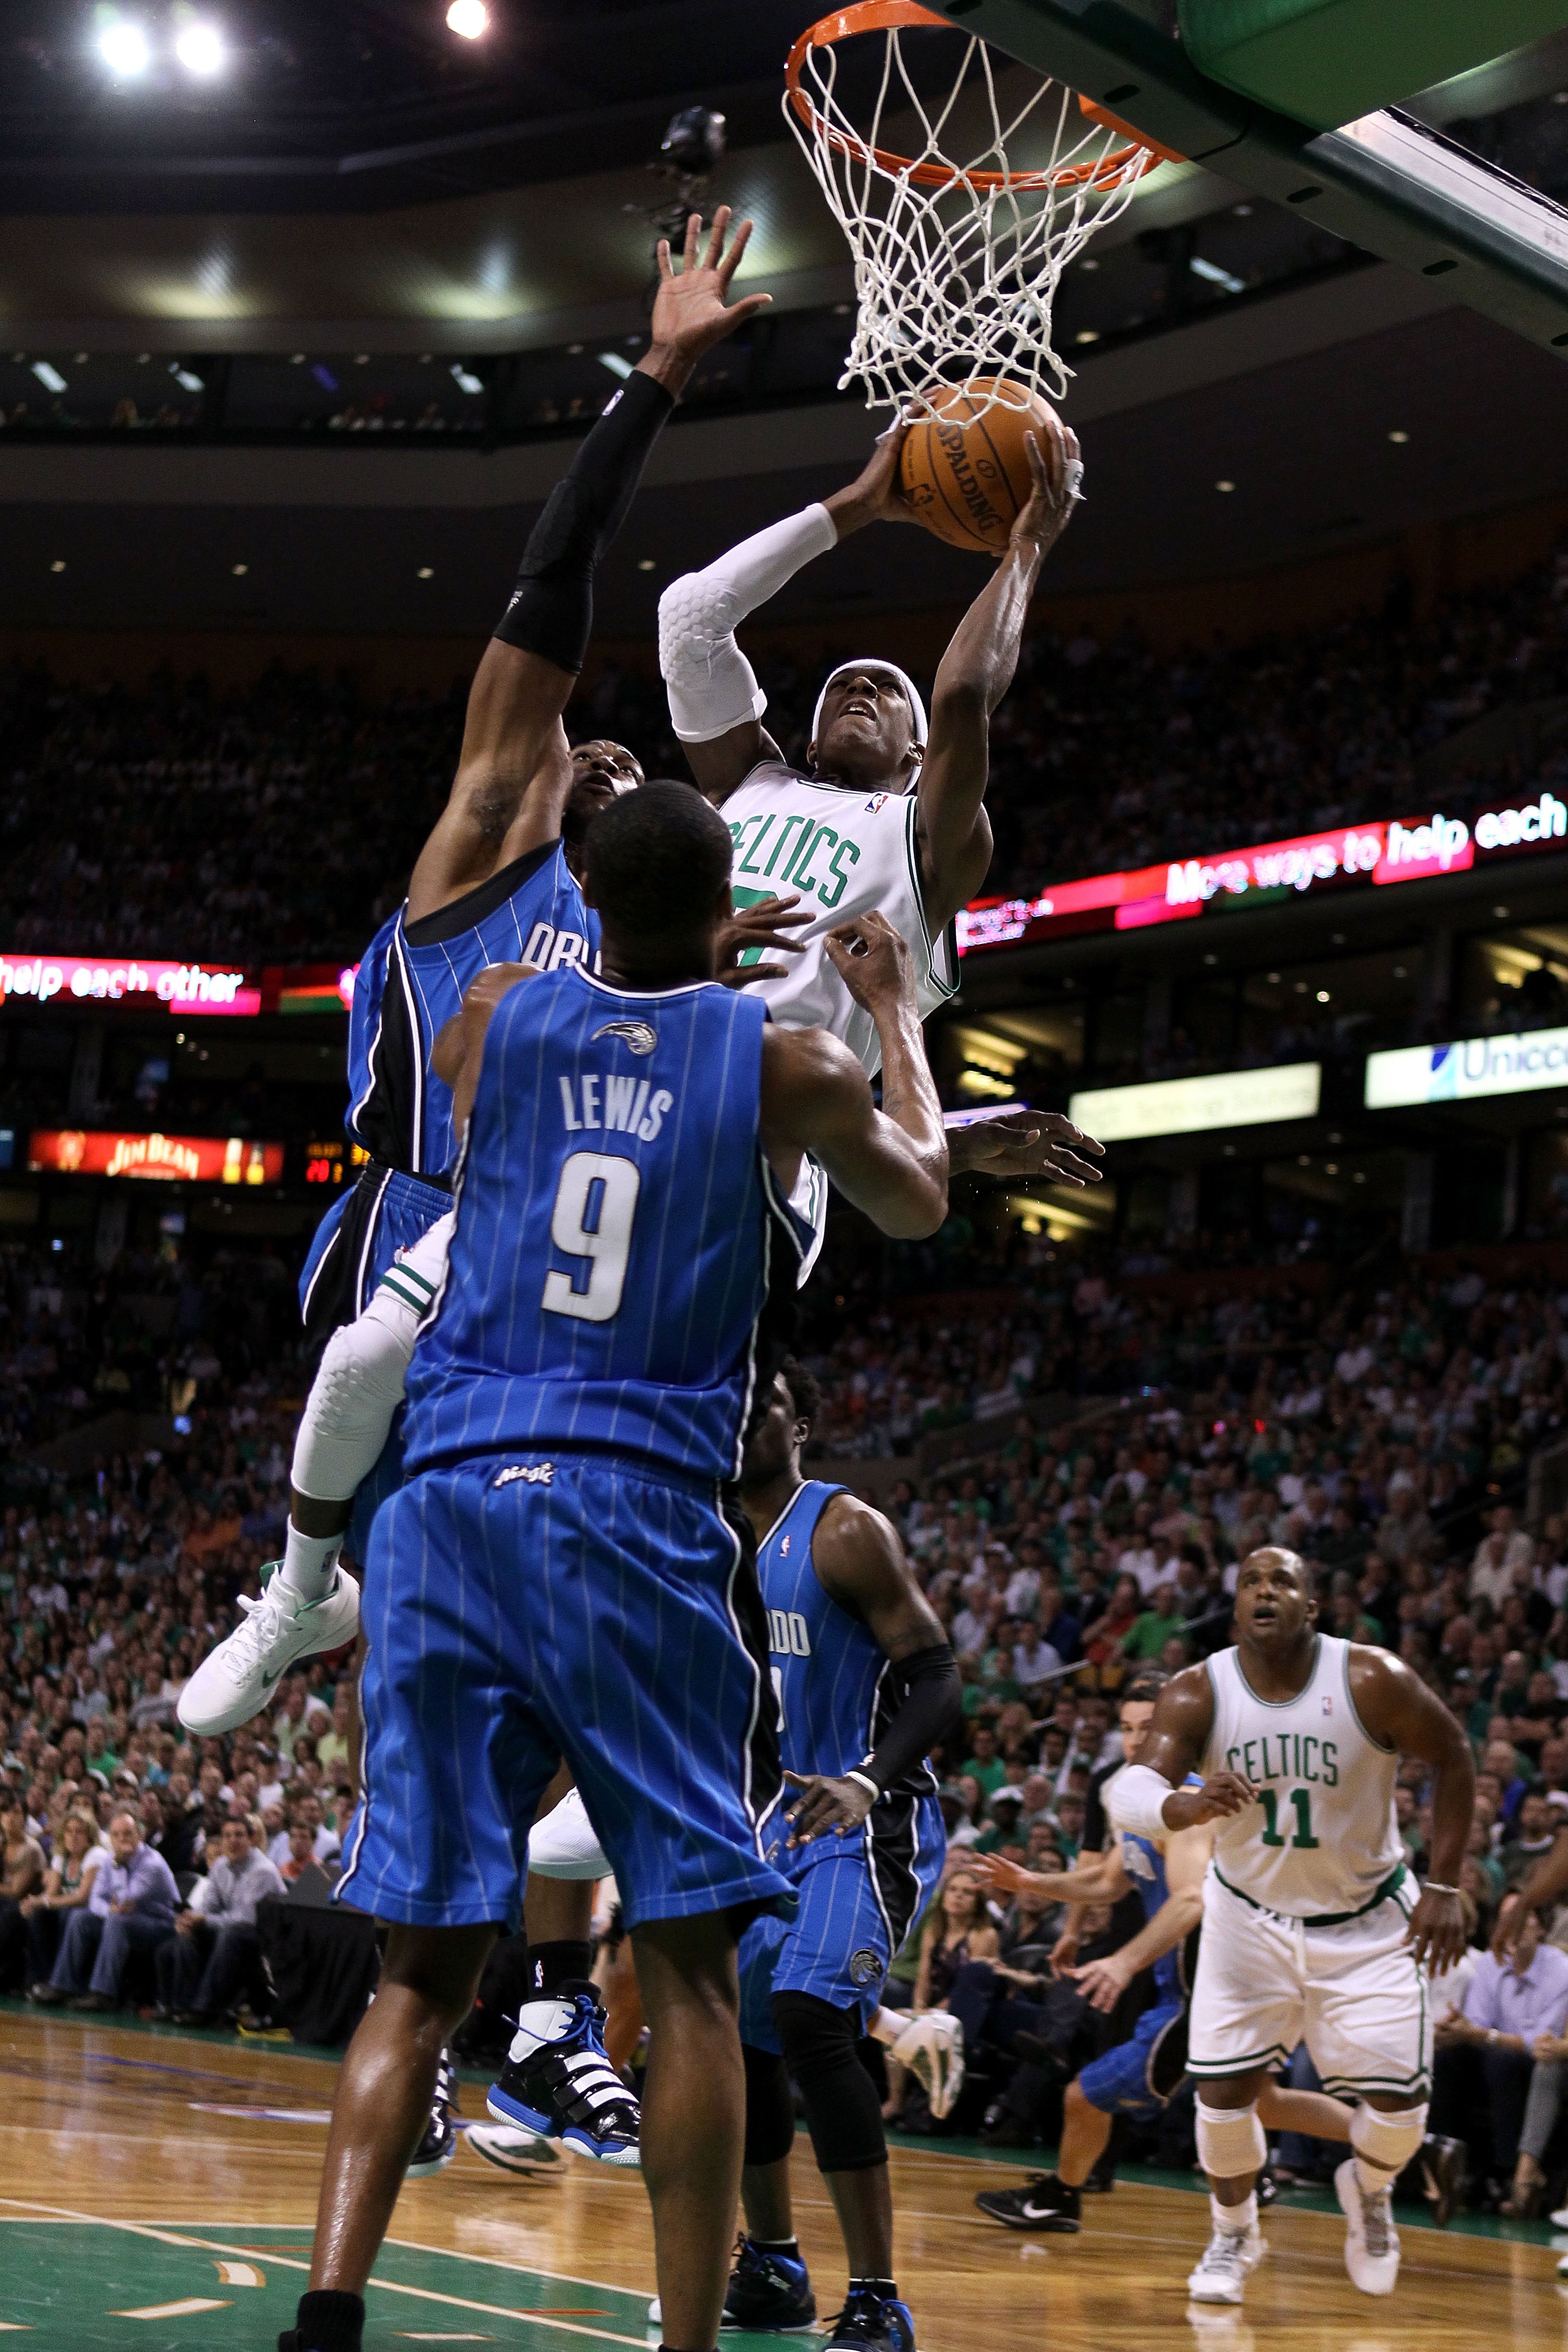 BOSTON - MAY 28:  Rajon Rondo #9 of the Boston Celtics attempts a shot as he falls and was fouled against Dwight Howard #12 of the Orlando Magic in Game Six of the Eastern Conference Finals during the 2010 NBA Playoffs at TD Garden on May 28, 2010 in Bost